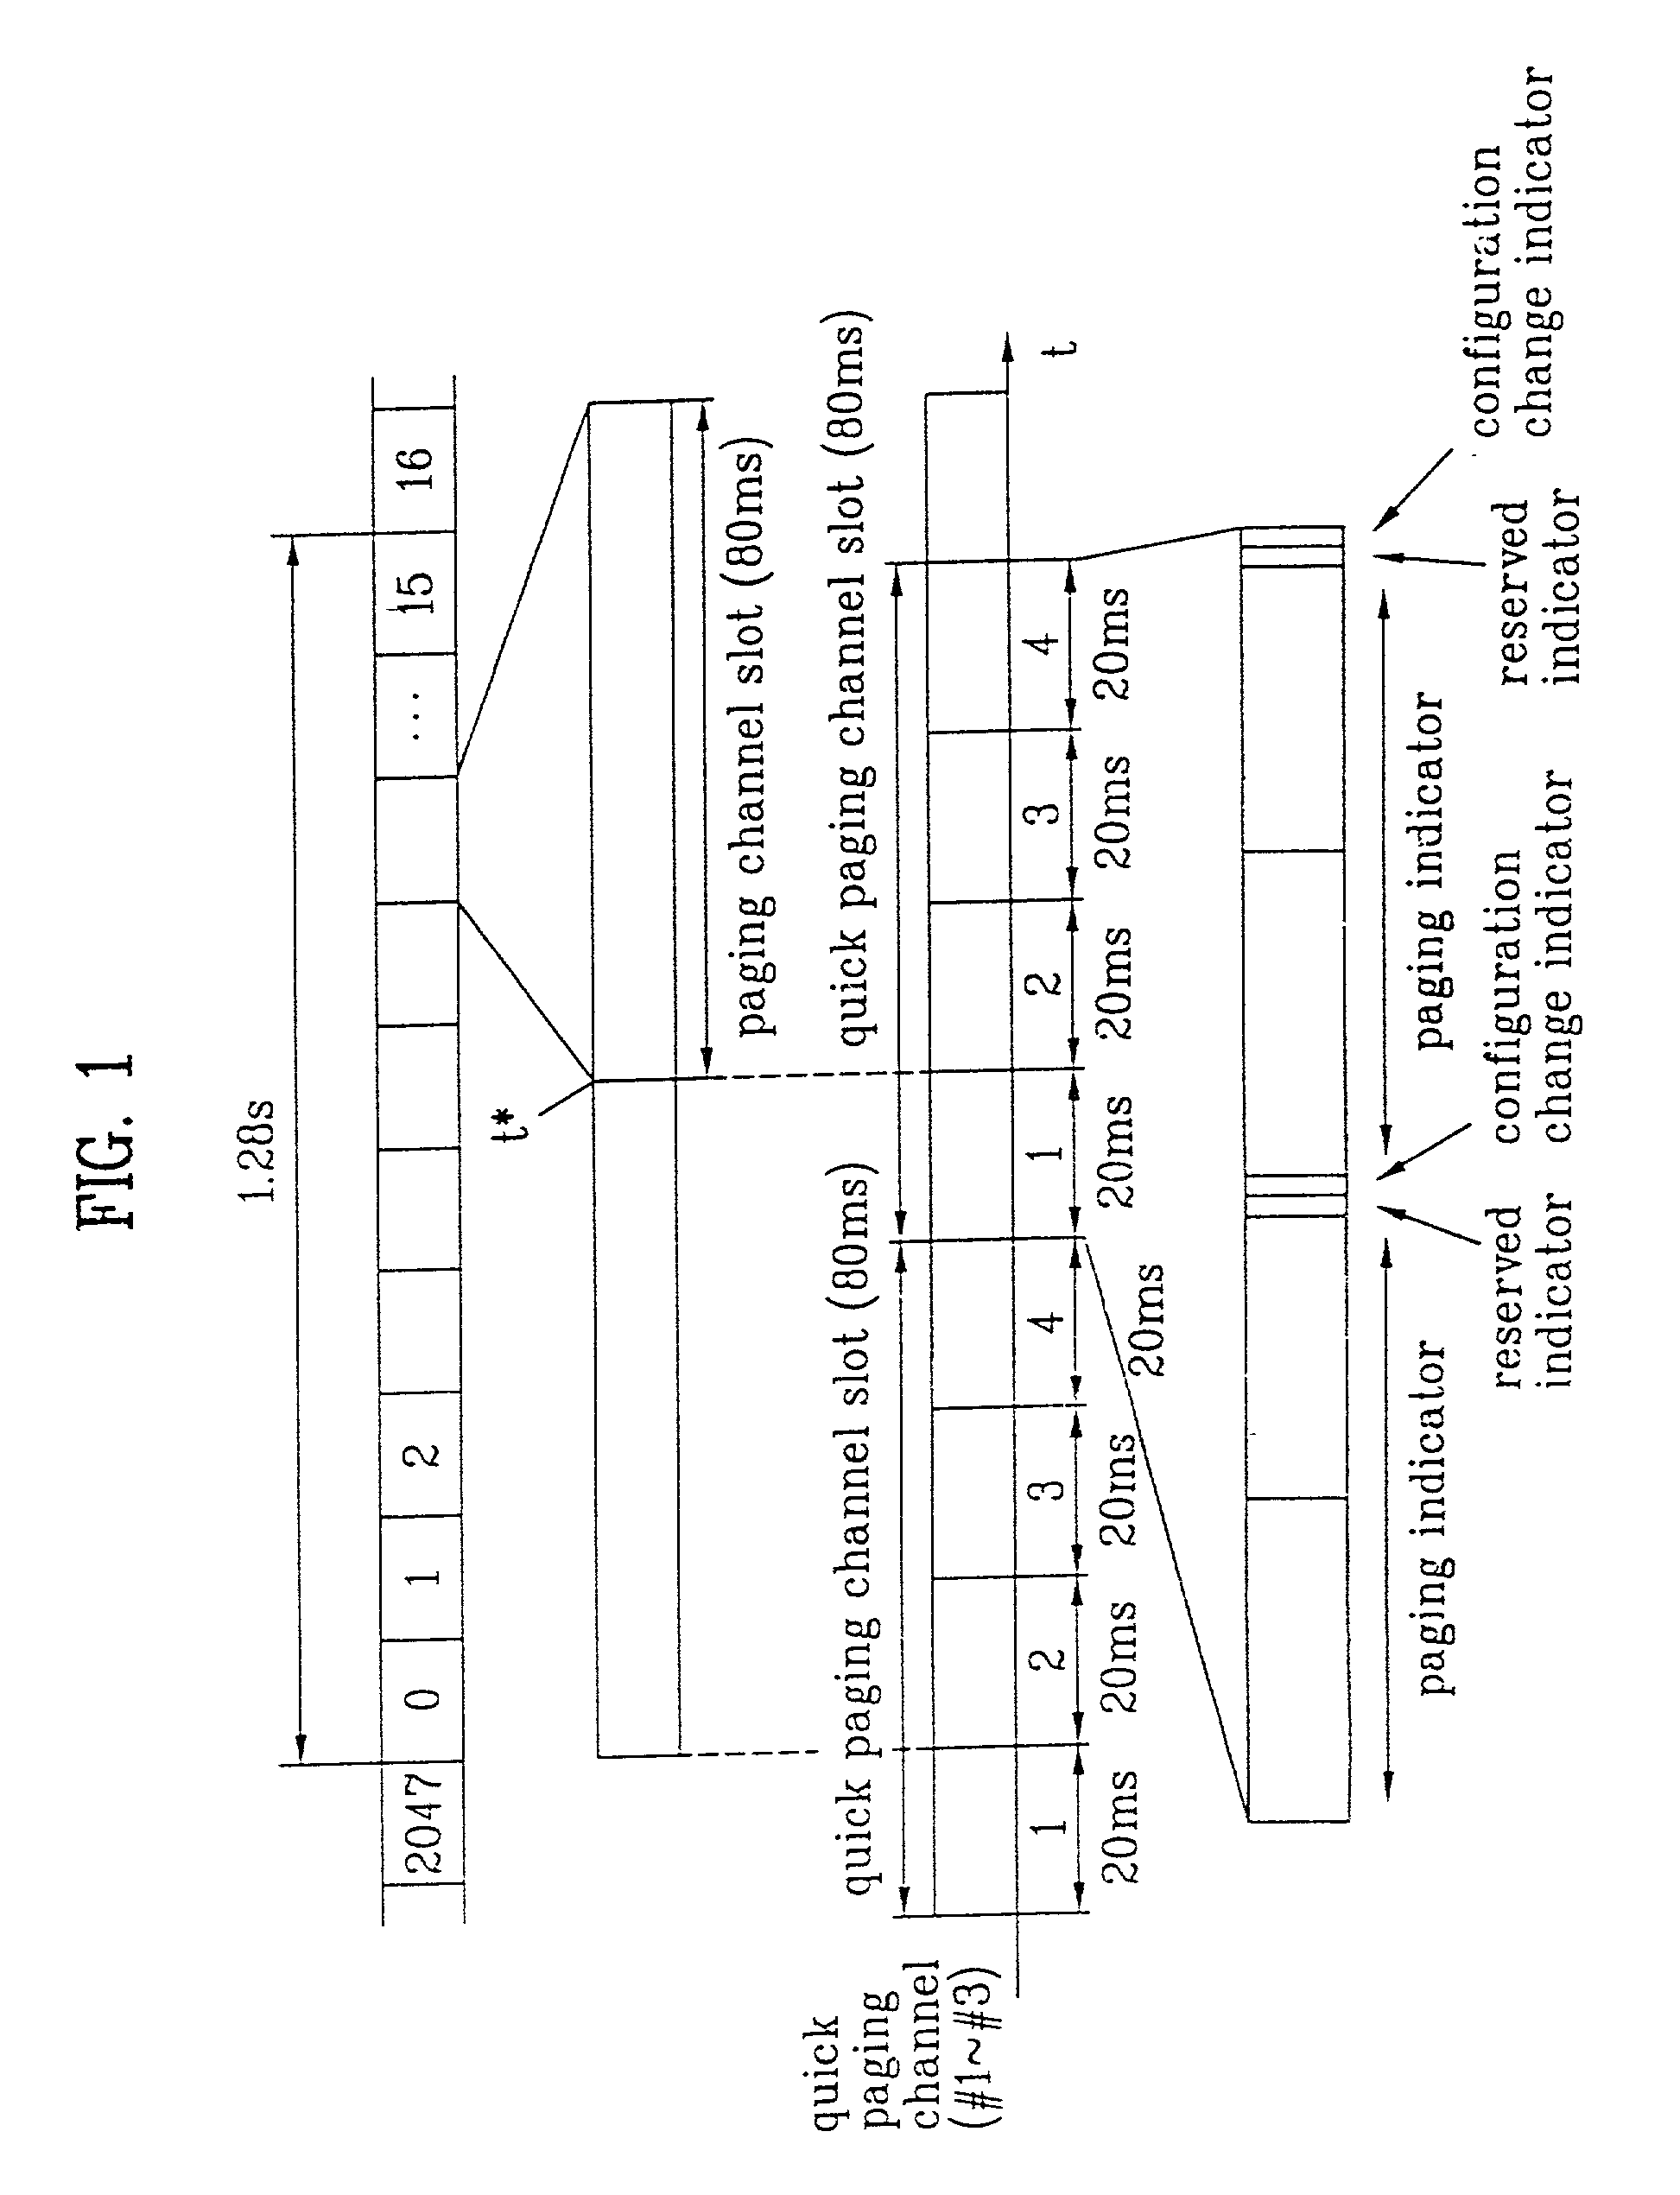 Method for transmitting message in paging channel